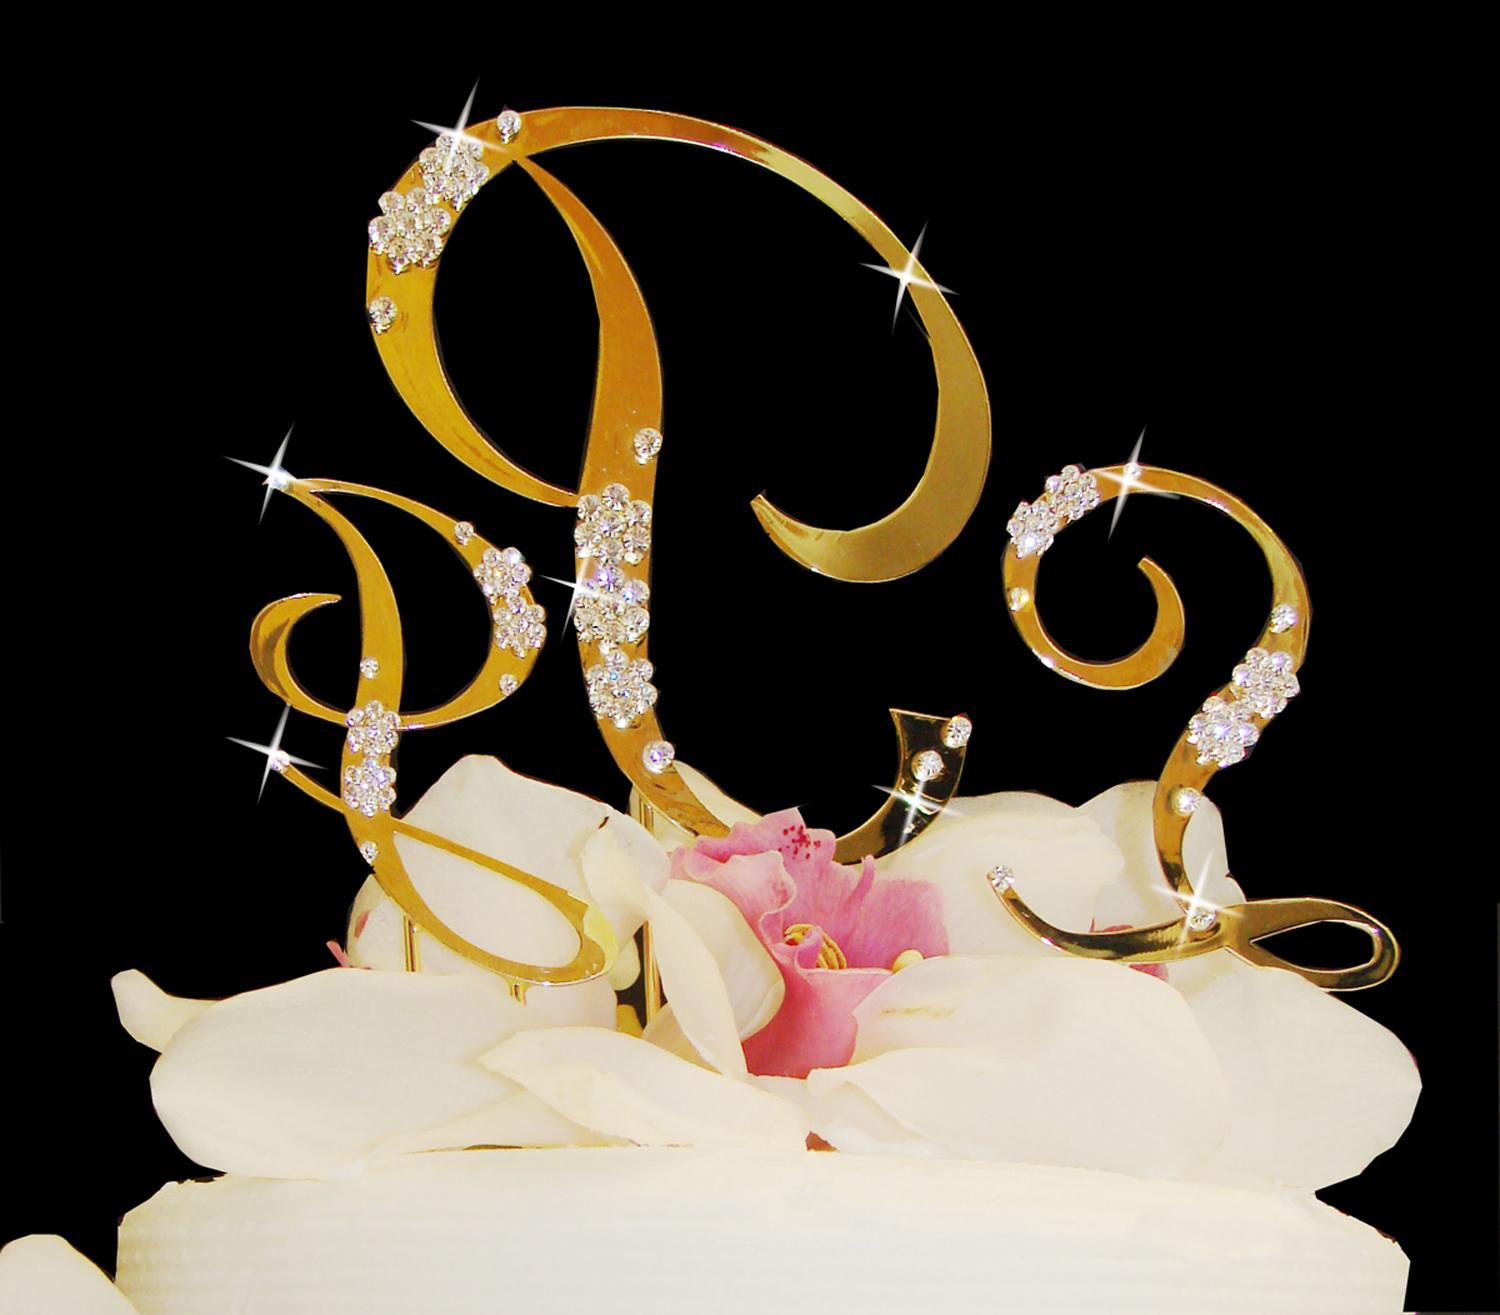 View ALL Wedding Cake Toppers